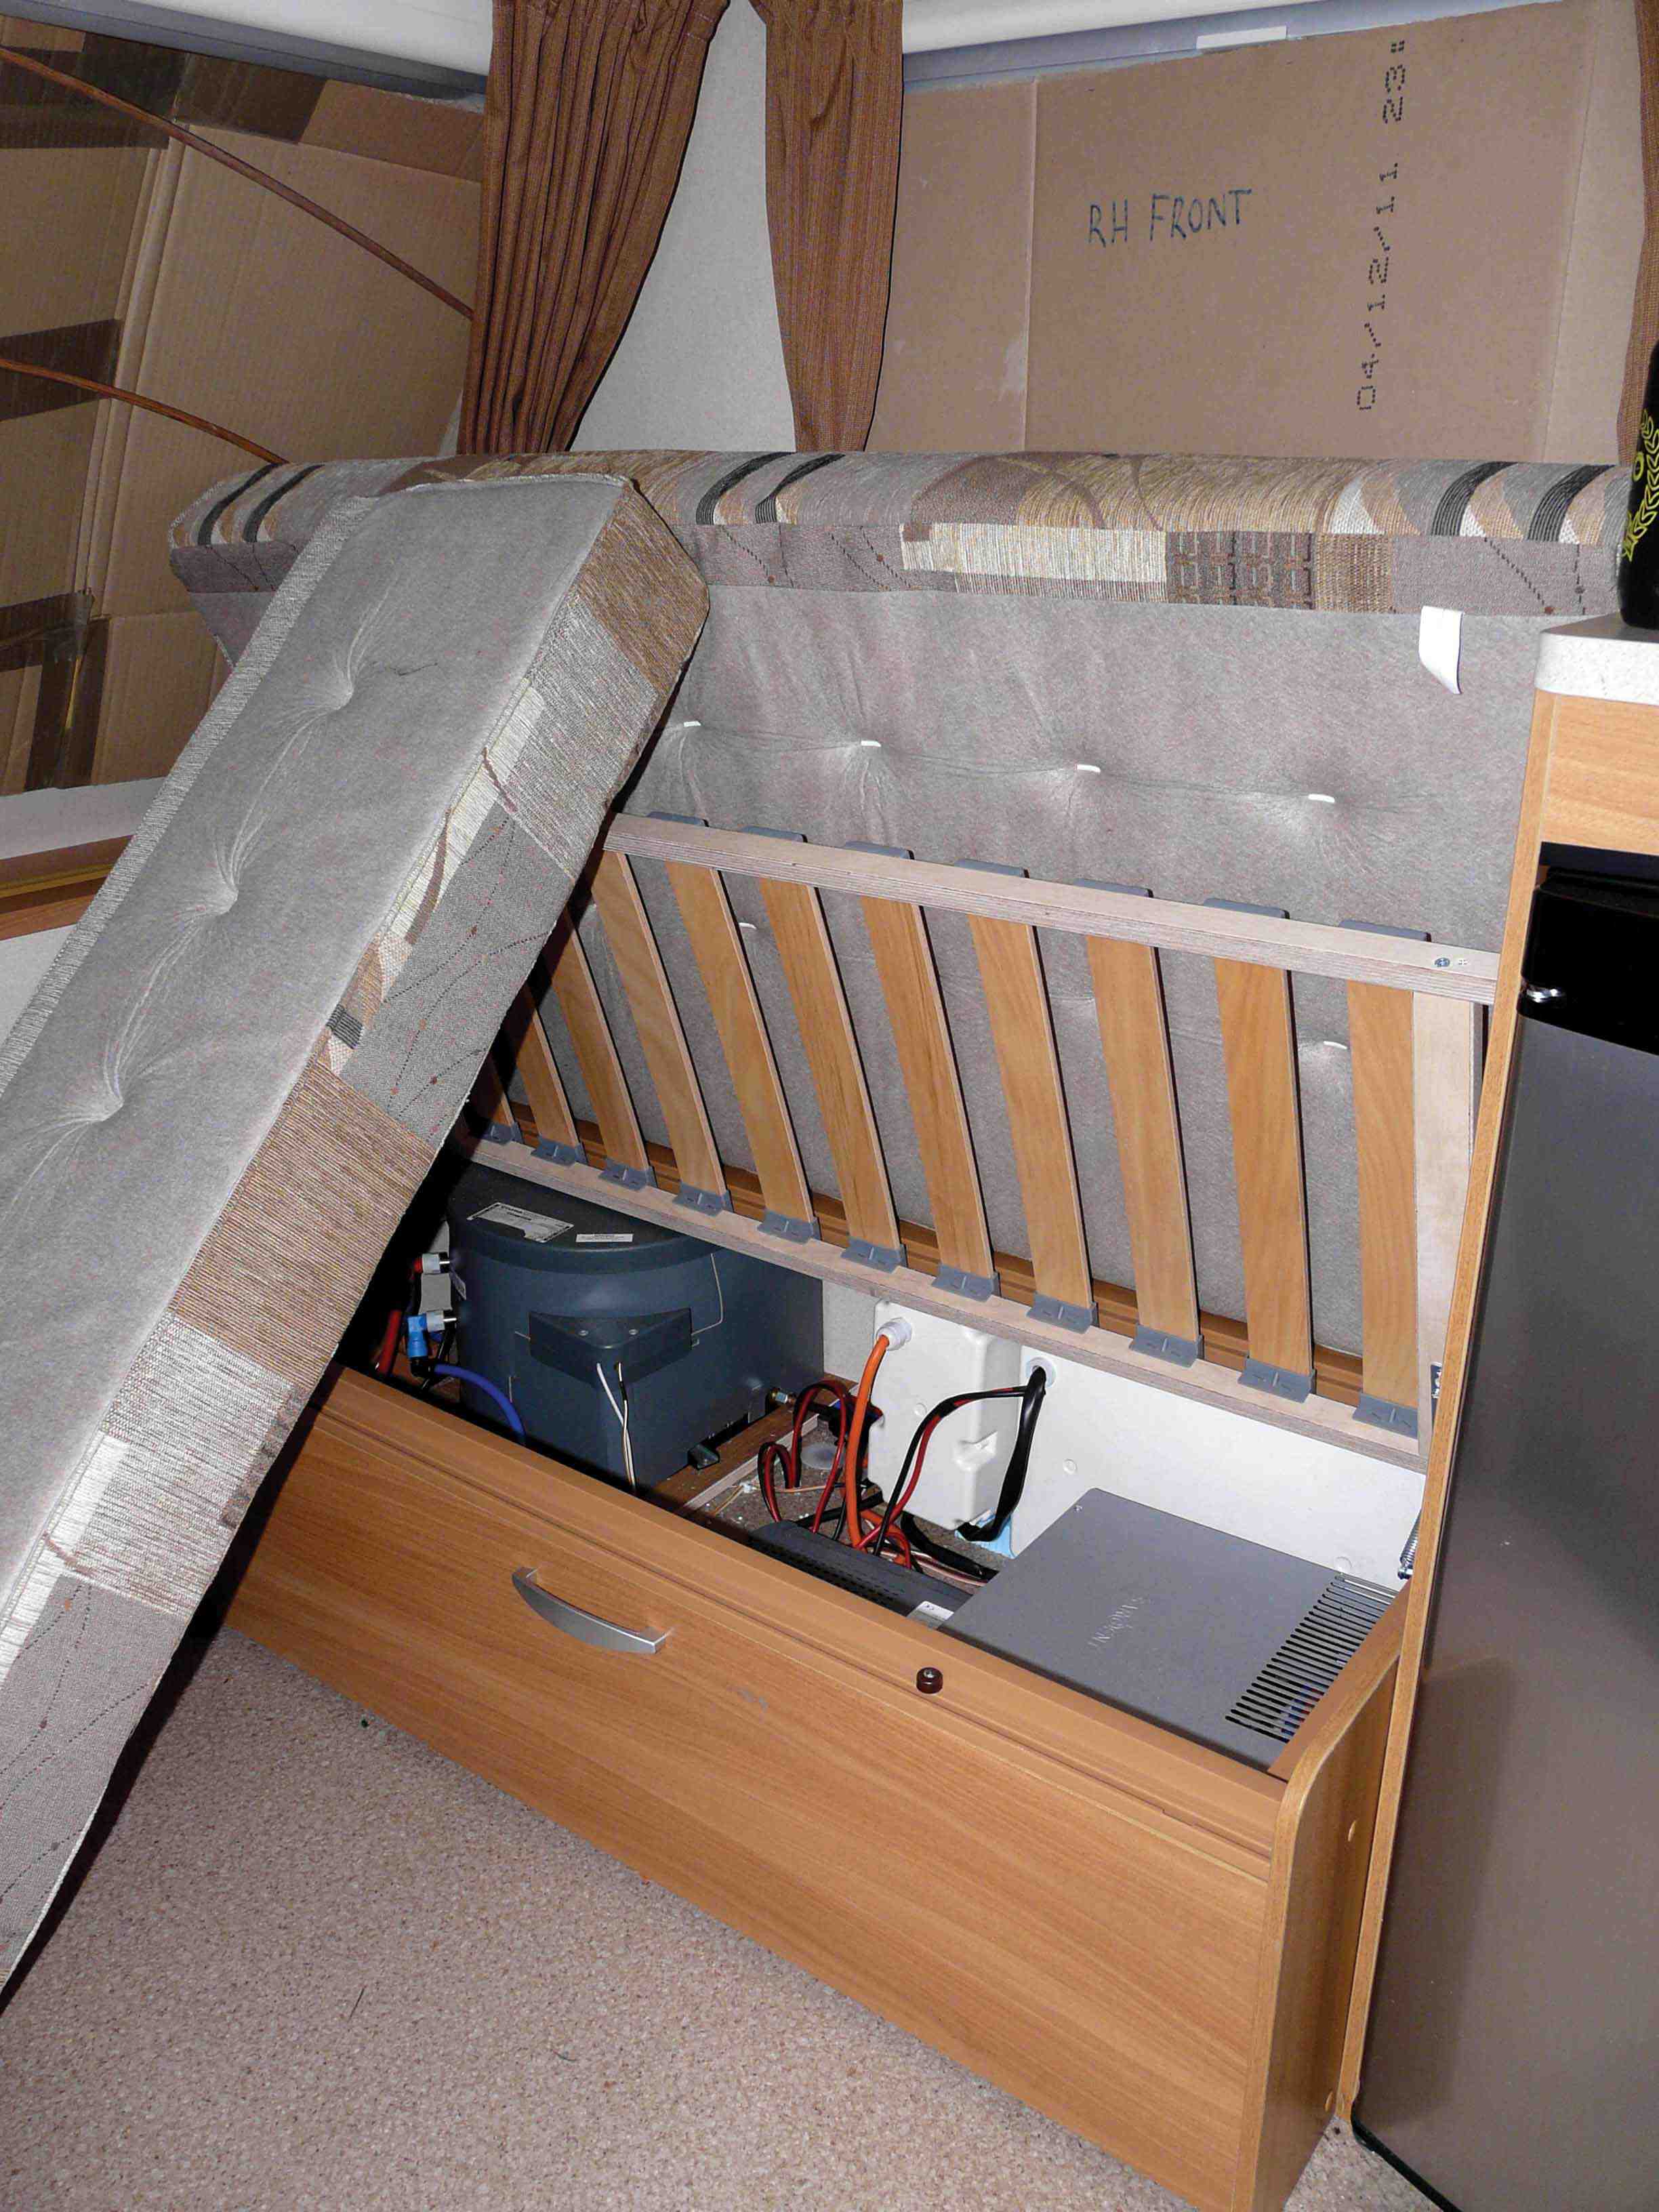 Move cushions to an upright position in the ‘van, or take them out and store somewhere dry and well ventilated, especially in ‘vans with solid ply seat bases